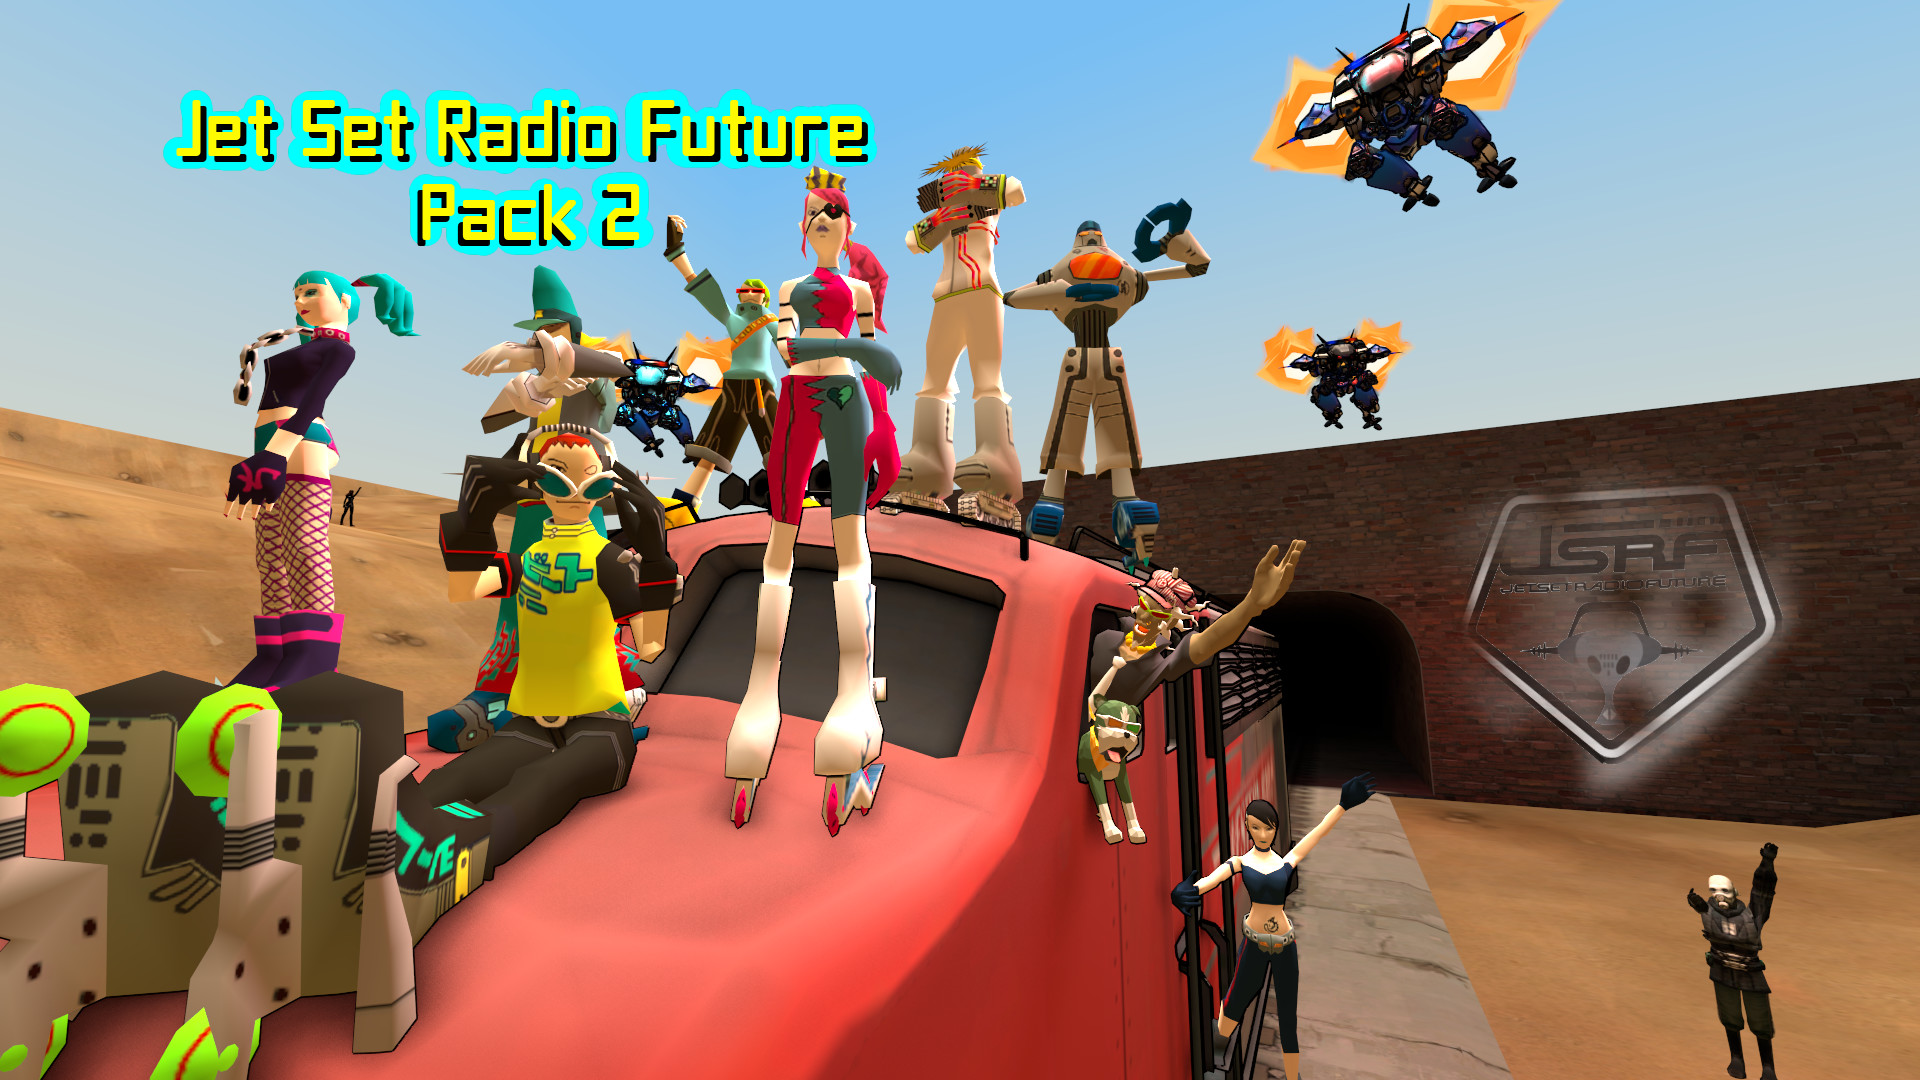 1920x1080 ... Jet Set Radio Future Pack 2: Source Film Maker by MGOUriel